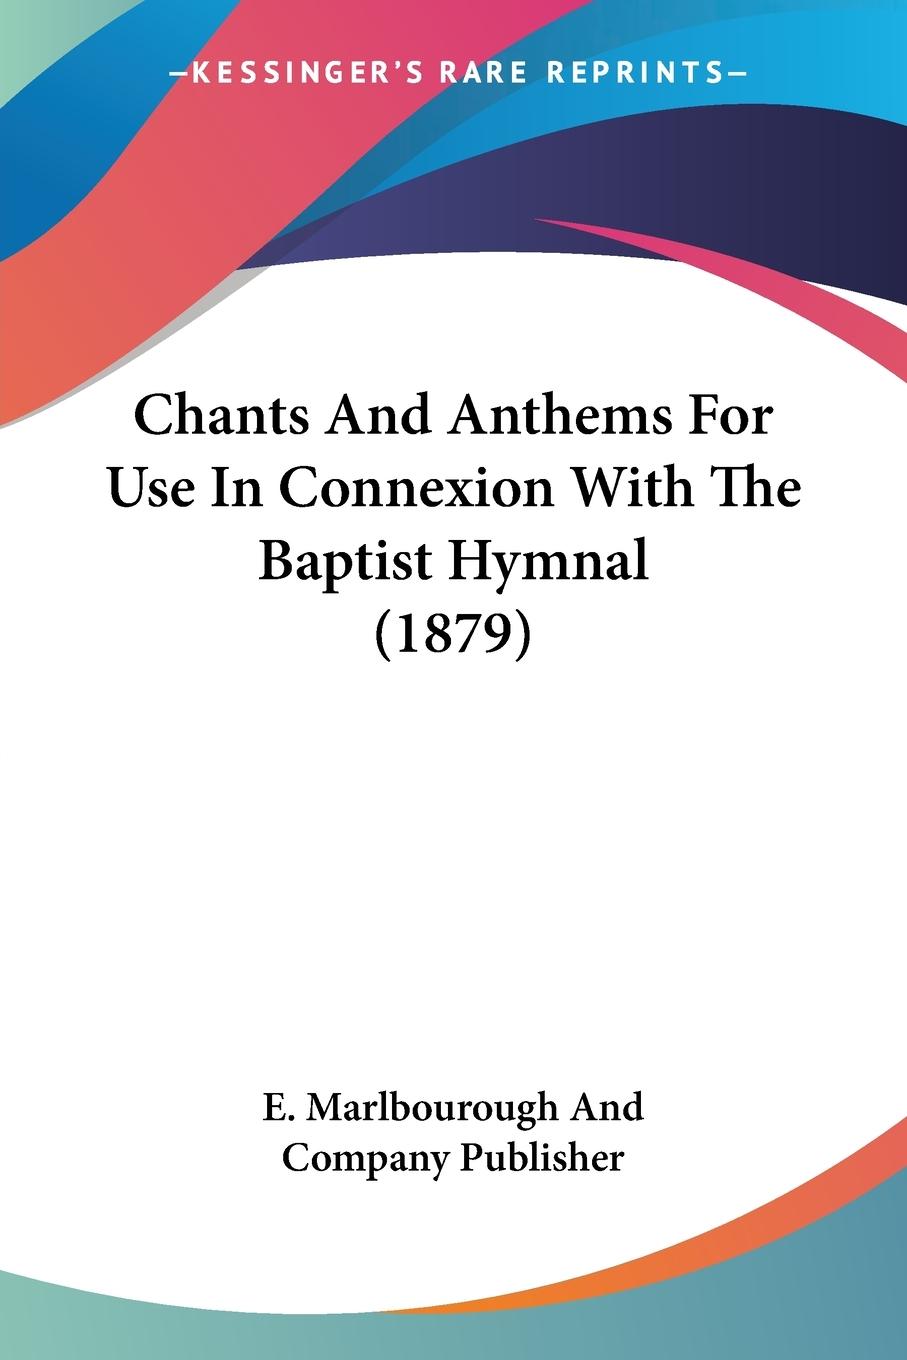 Chants And Anthems For Use In Connexion With The Baptist Hymnal (1879) - E. Marlbourough And Company Publisher